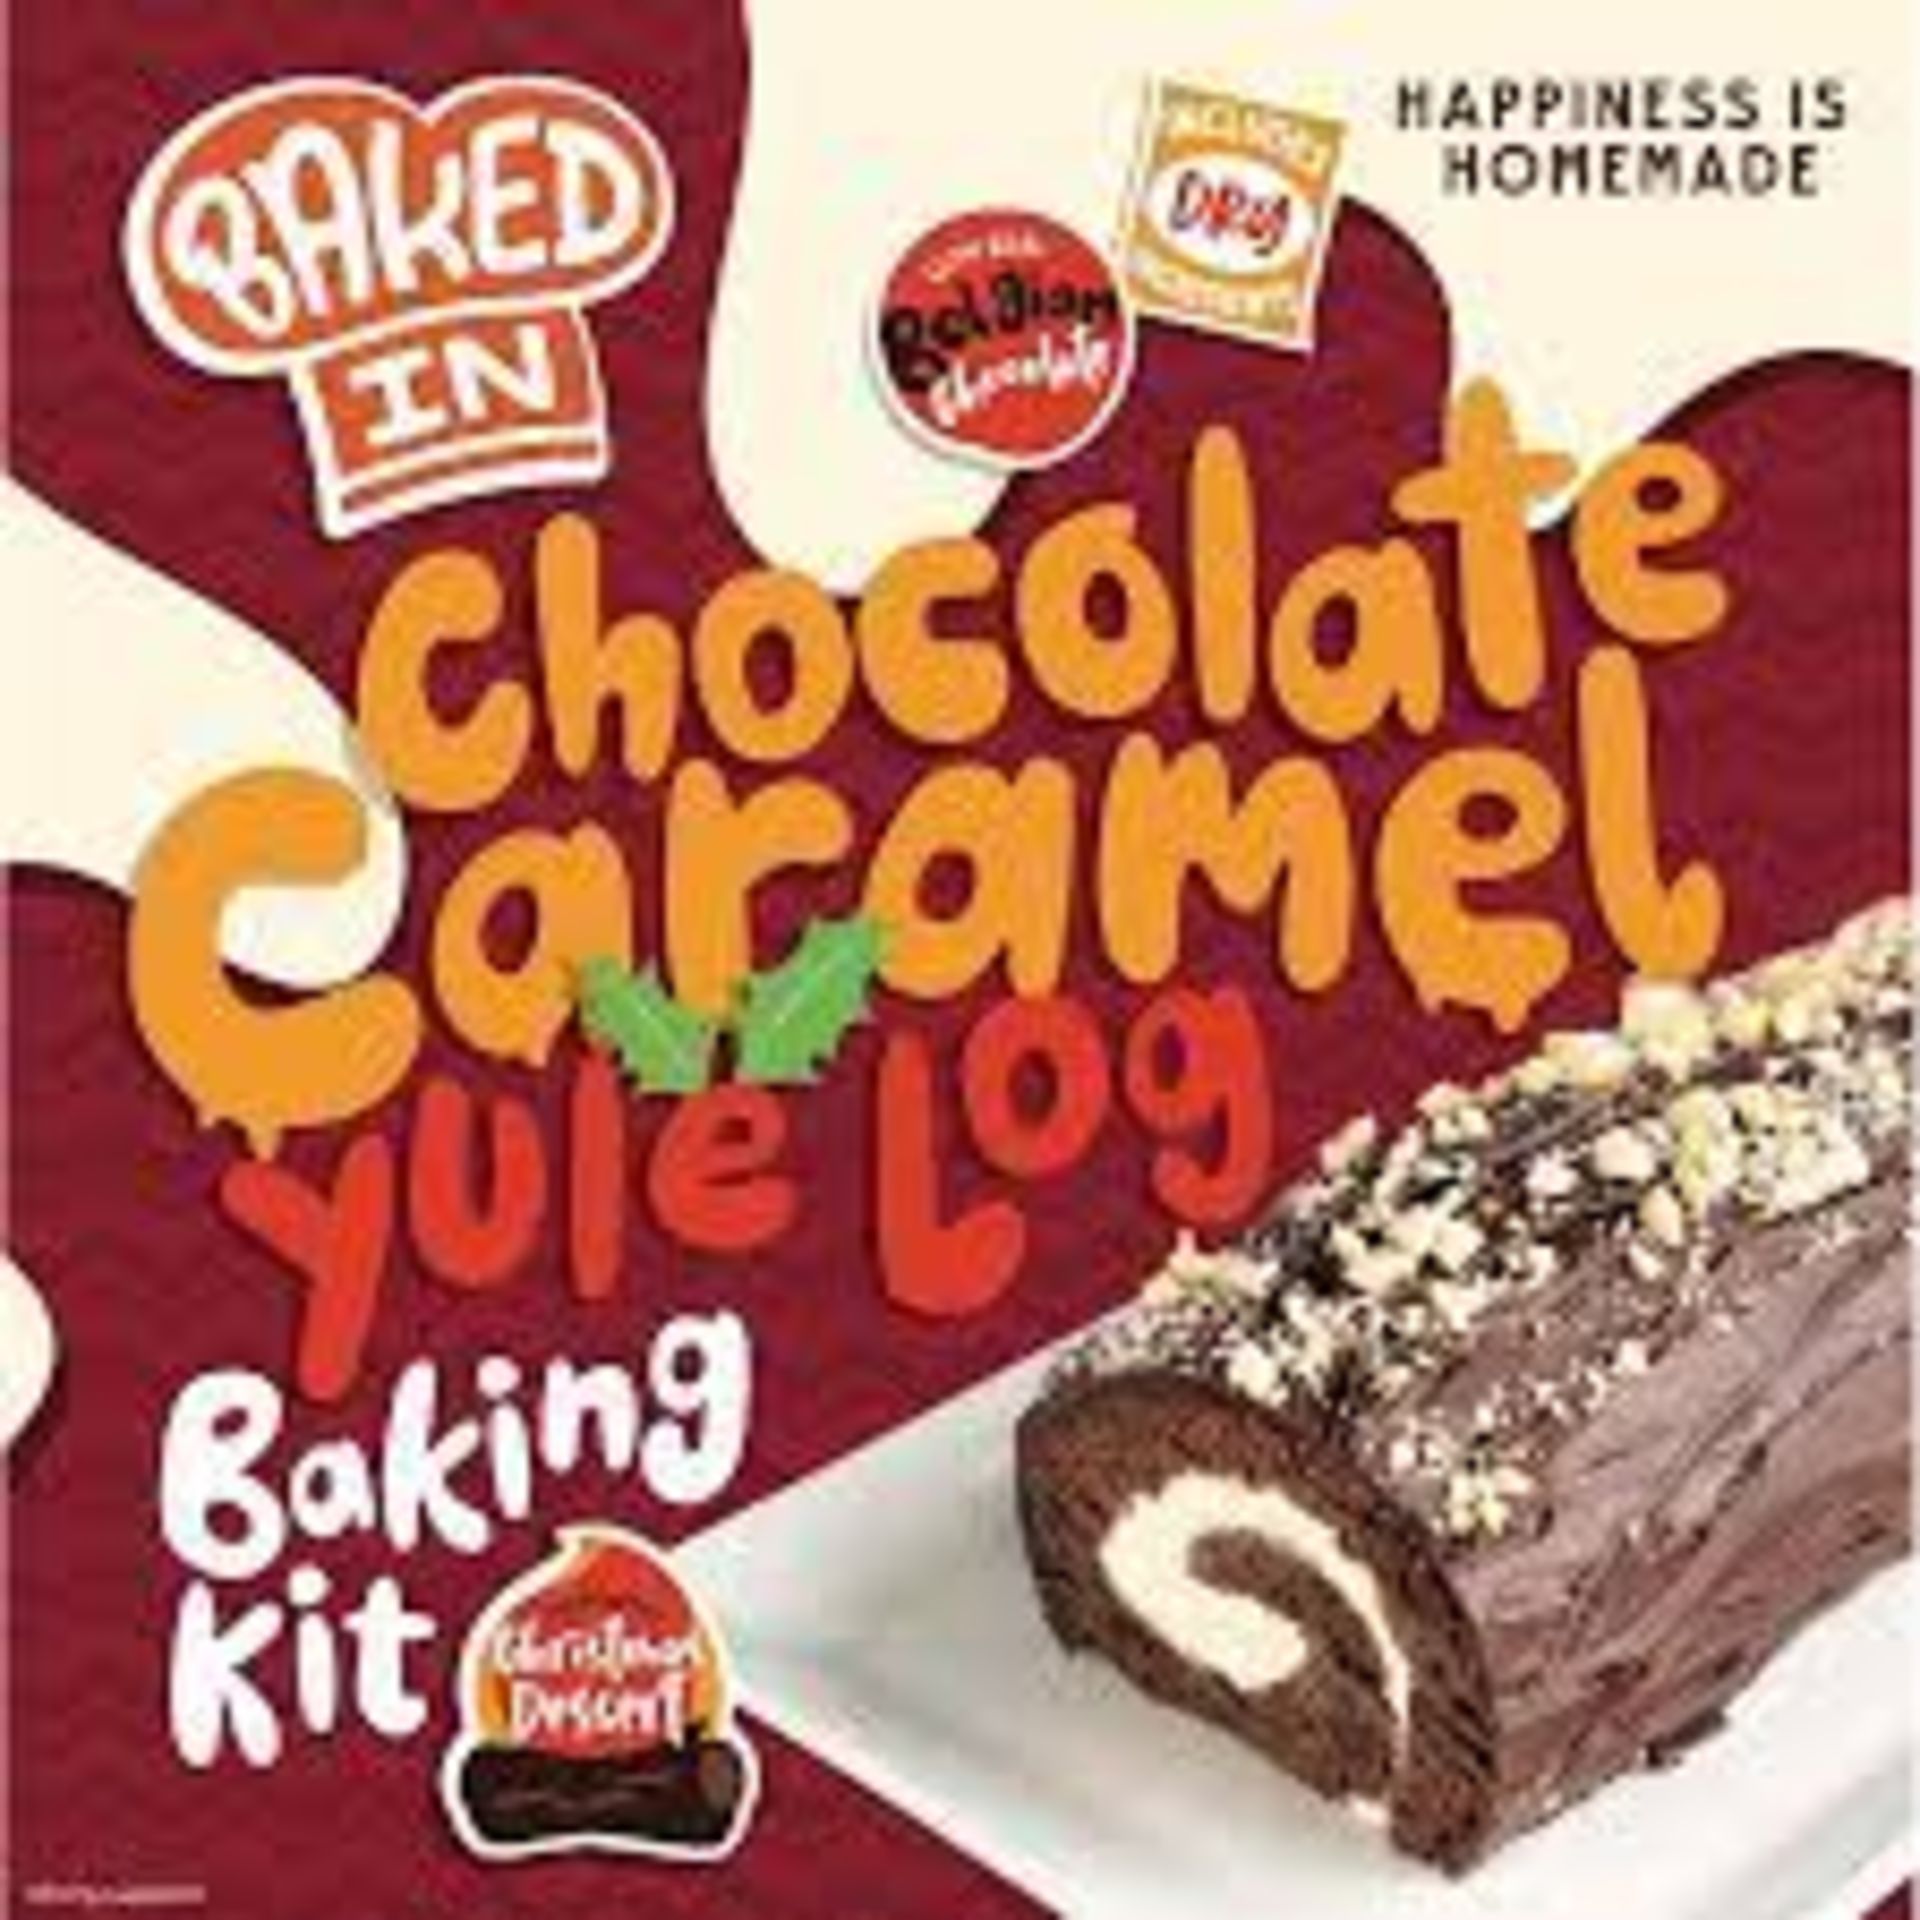 RRP £325 (Approx. Count 34) spW56V8852N(1)   21 x Baked In - Chocolate & Caramel Yule Log Baking Kit